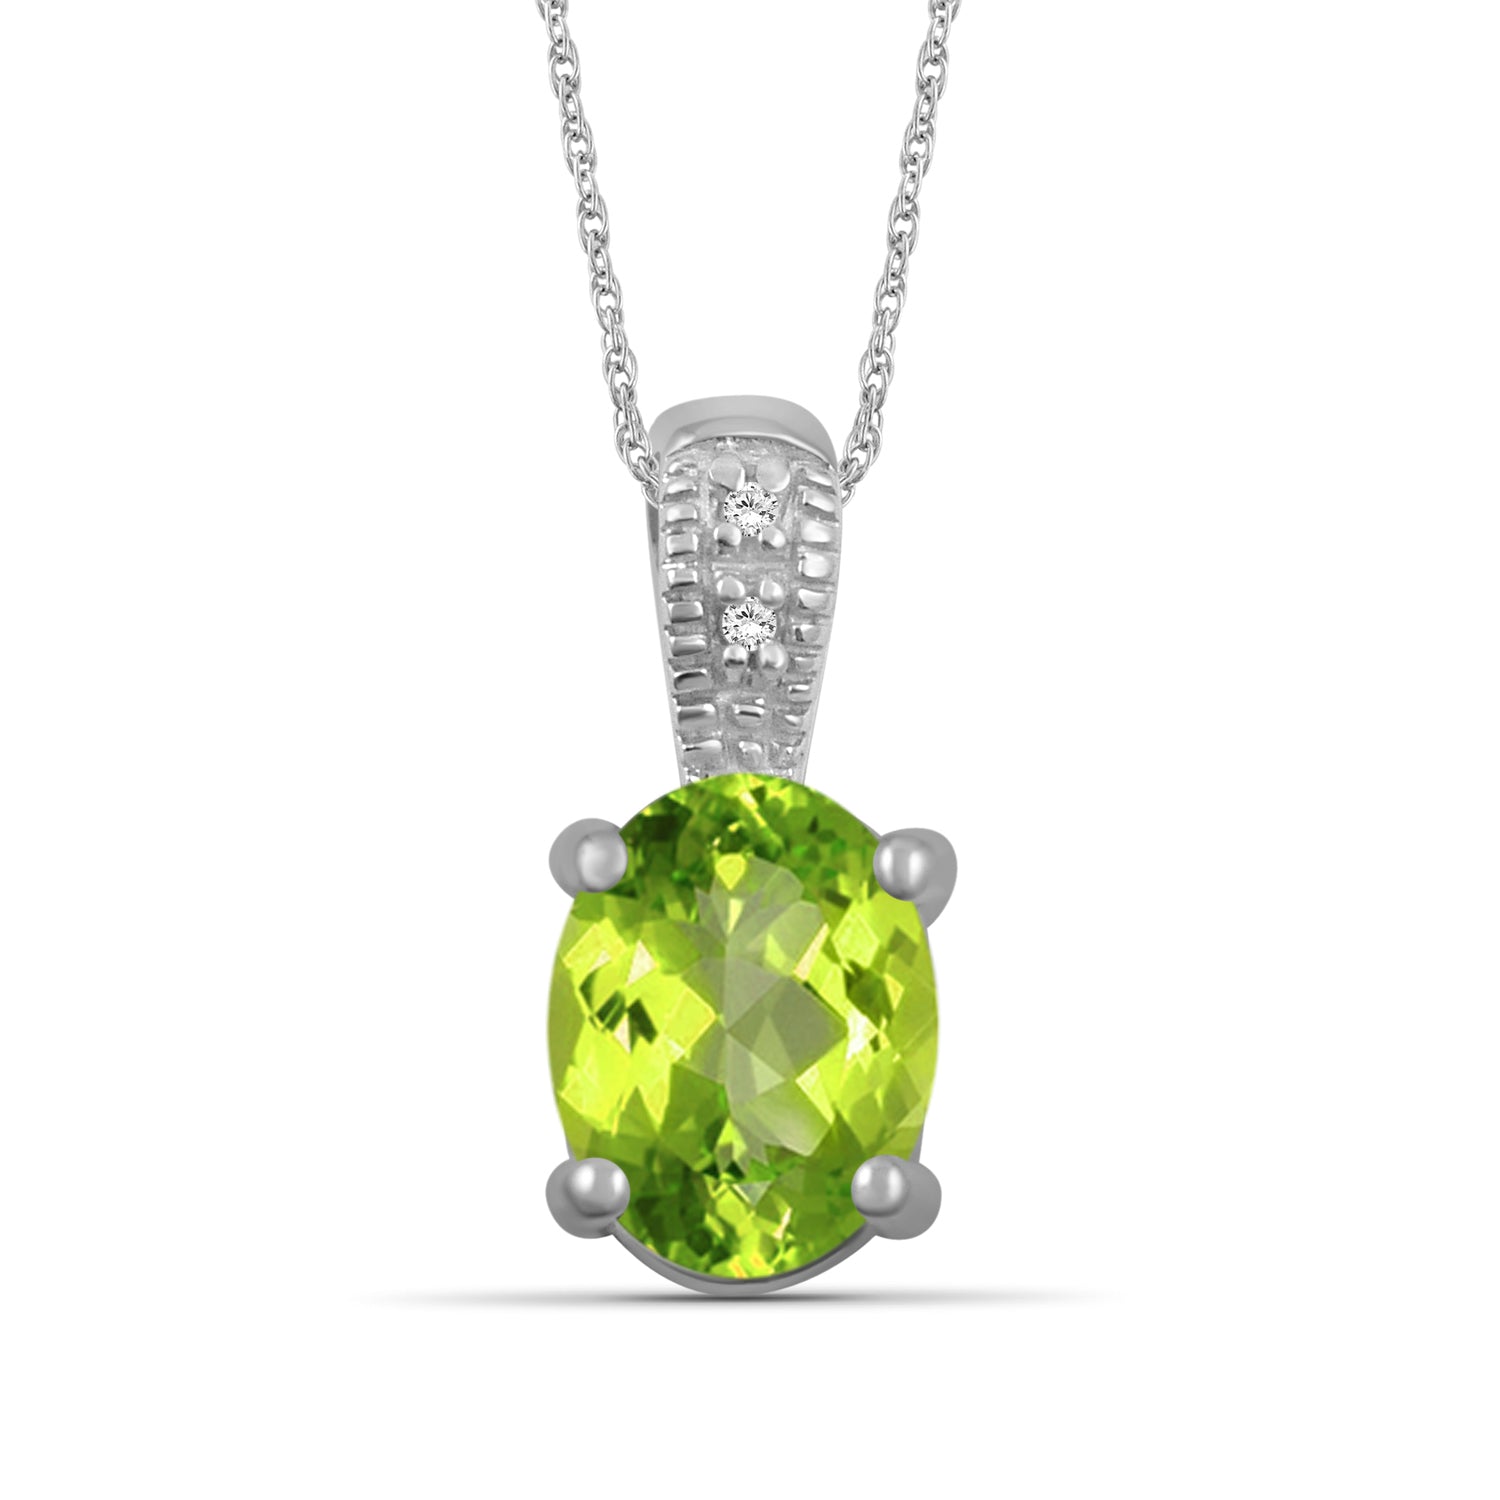 0.82 Carat Peridot Gemstone and Accent Diamond Pendant Sterling Silver Necklace